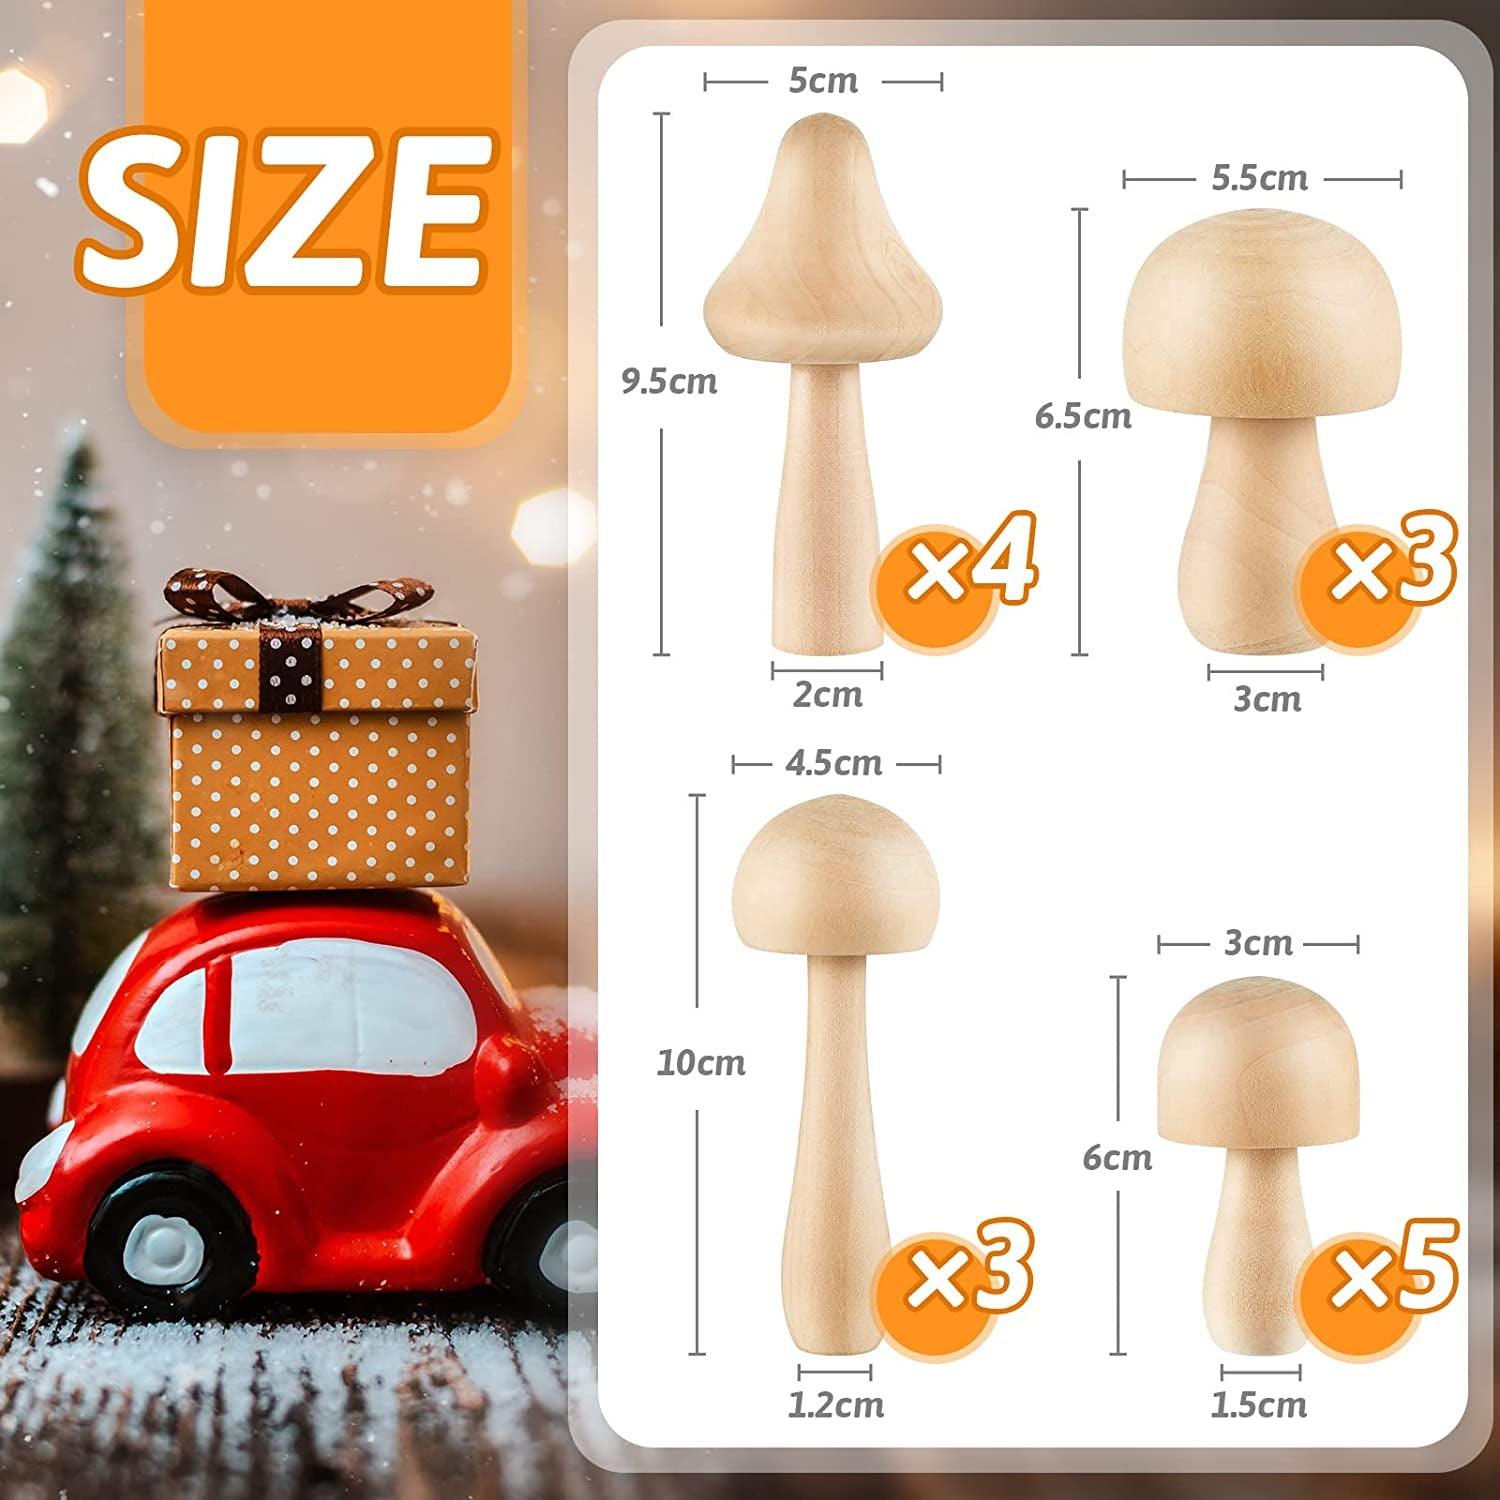 15 Unfinished Wooden Mushroom Natural Unpainted for Arts and Crafts Projects Decoration DIY Paint Color - WoodArtSupply